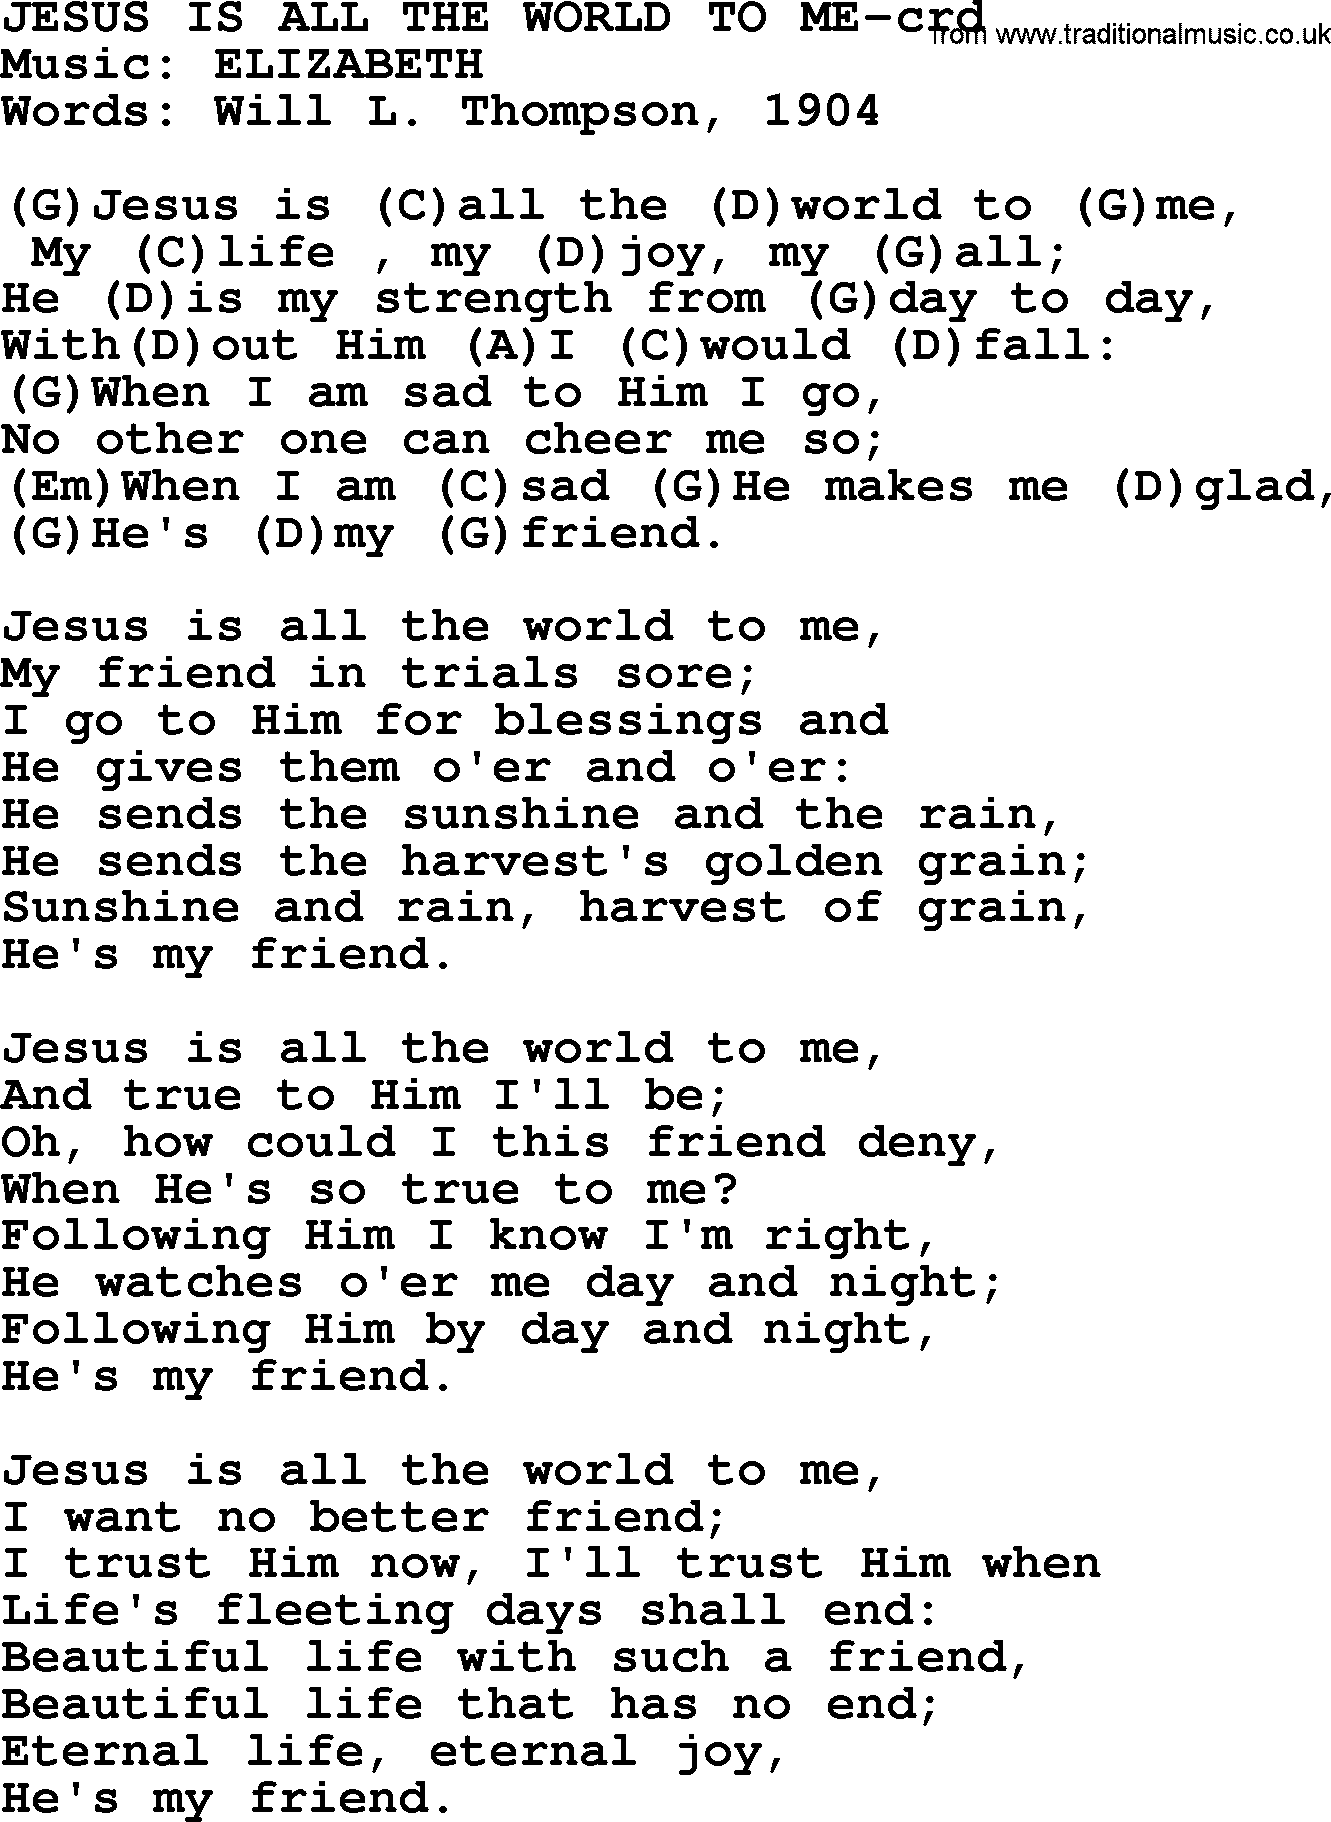 Top 500 Hymn: Jesus Is All The World To Me, lyrics and chords